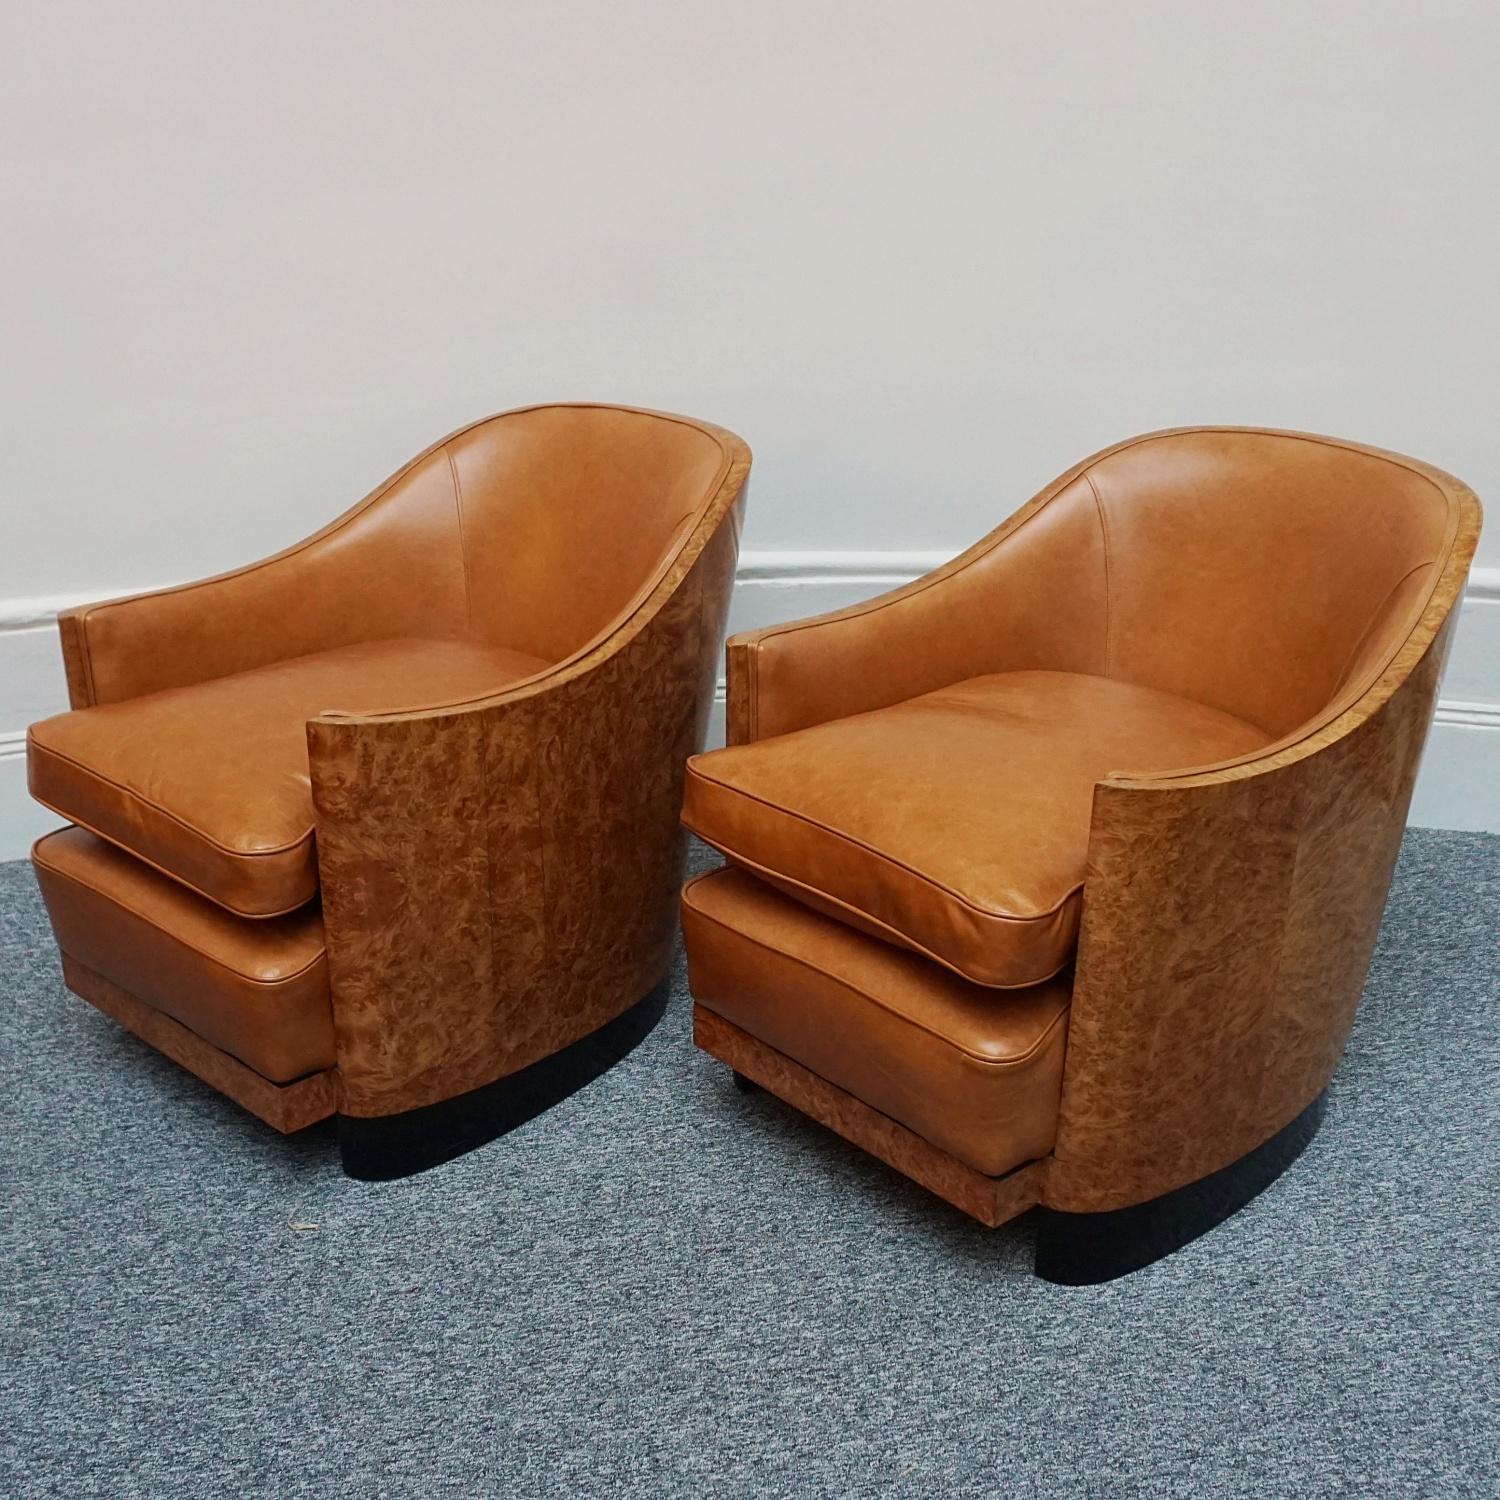 Original 1930s English Art Deco Club Chairs Walnut and Brown Leather 3